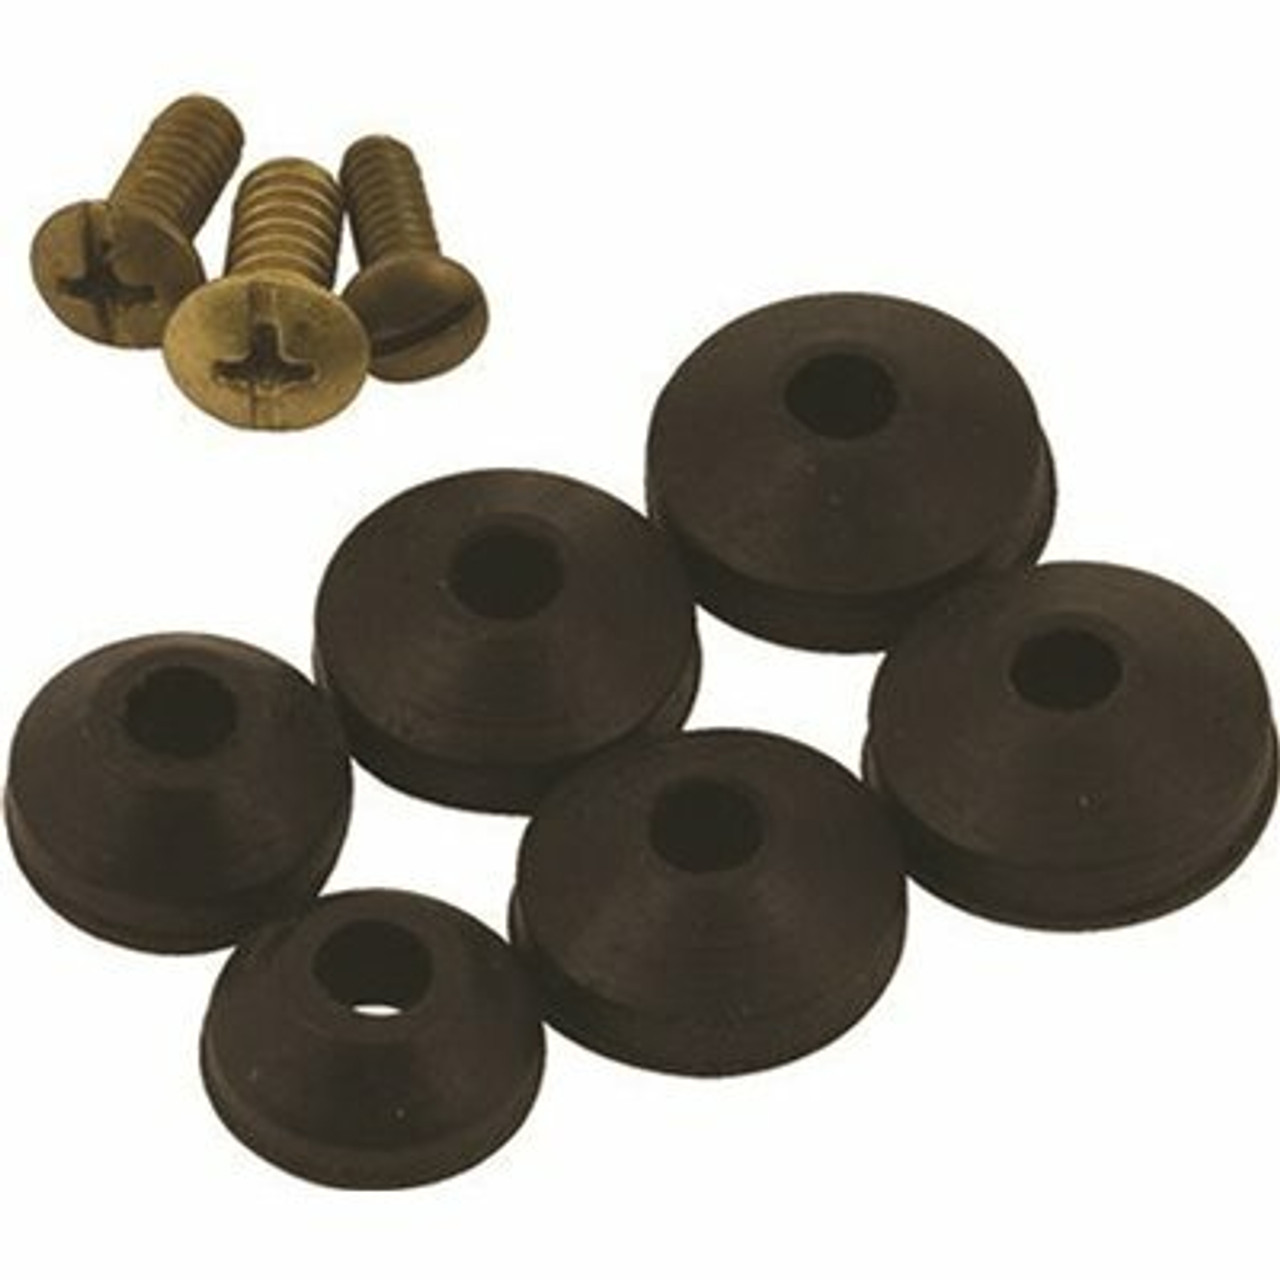 Proplus Beveled Washer Kit From 1/4M To 3/8M (20-Piece)